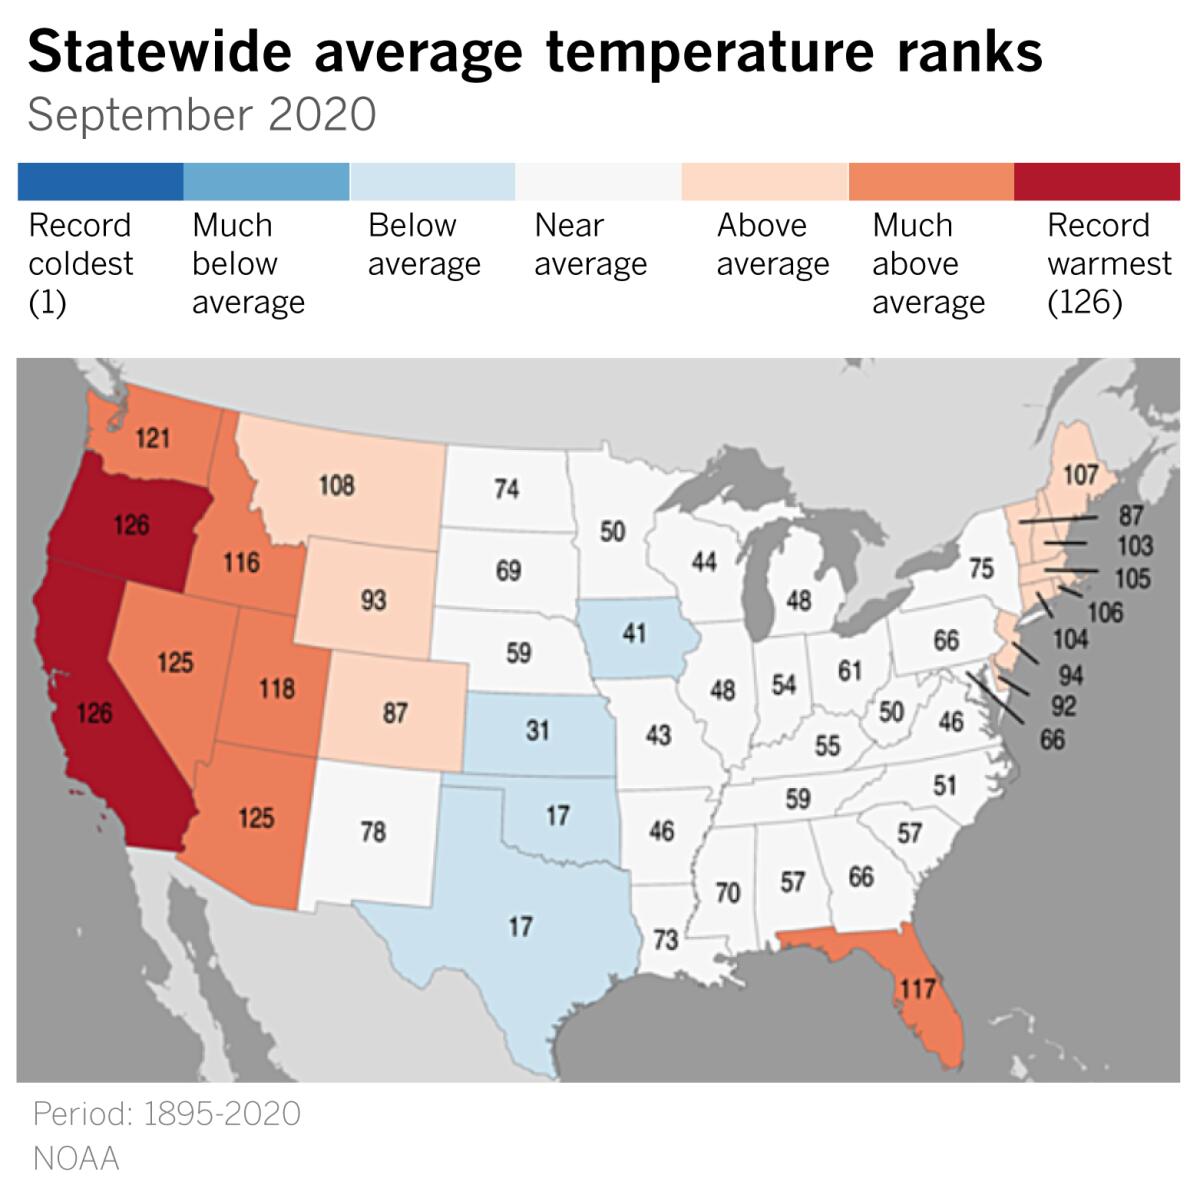 September saw record heat in both California and Oregon this year.